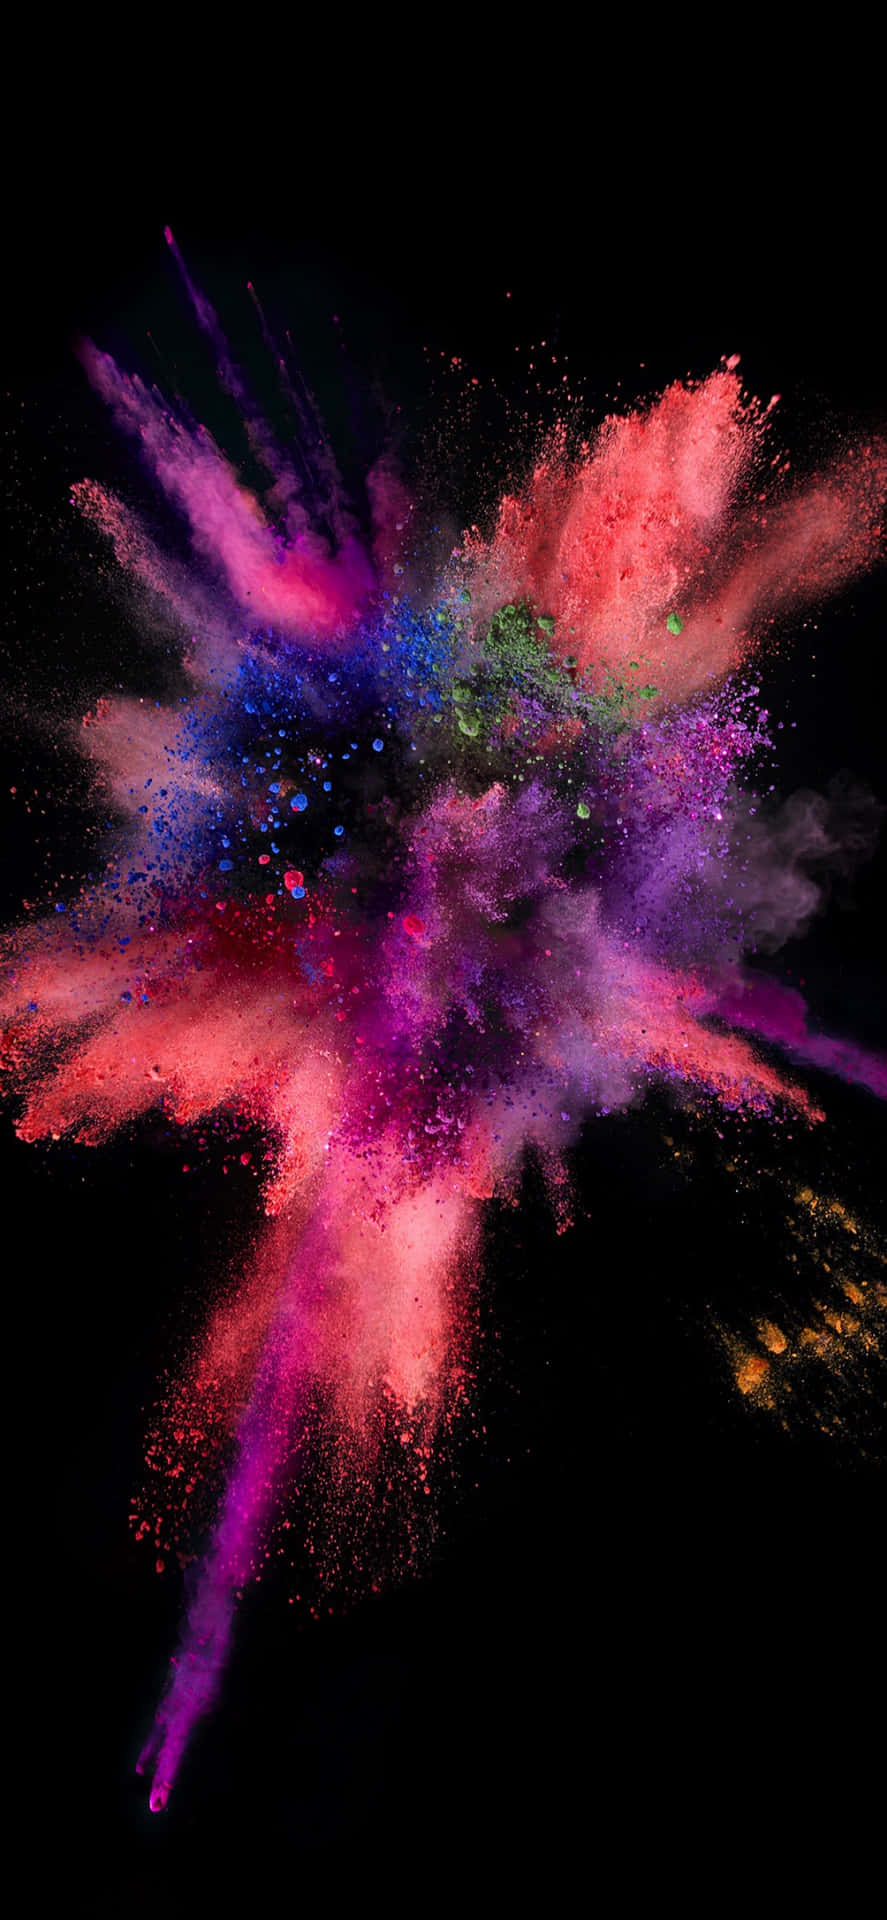 A Colorful Powder Explosion Wallpaper